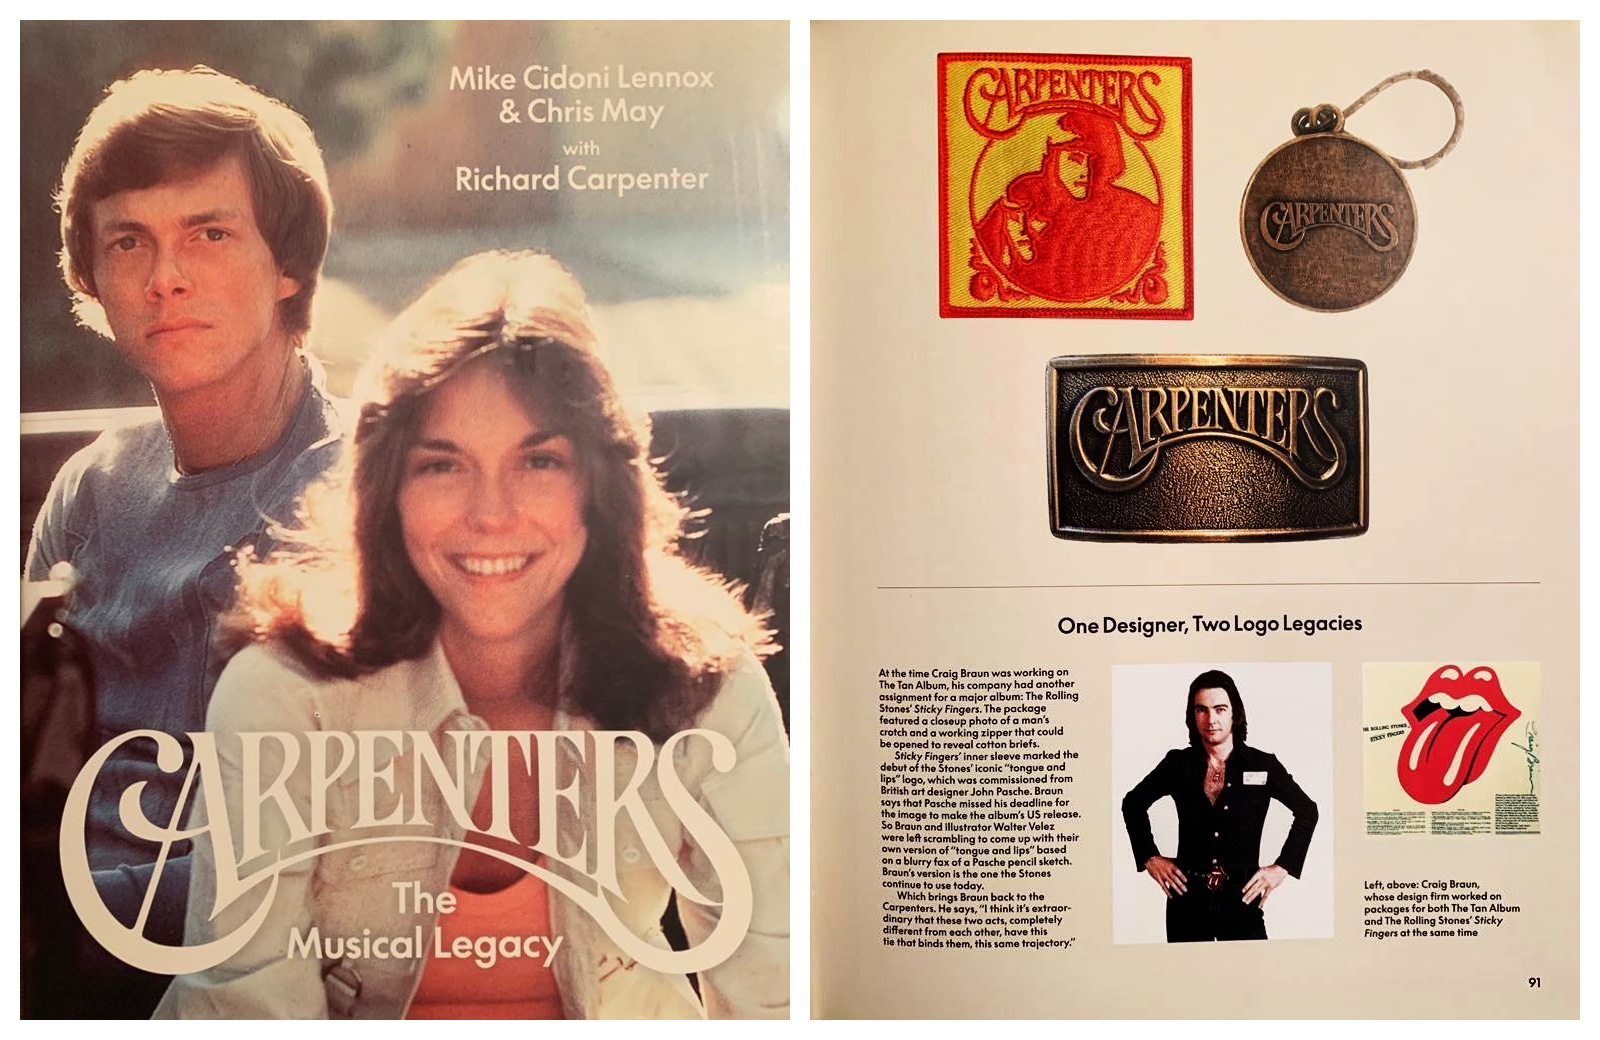 Carpenters The Musical Legacy